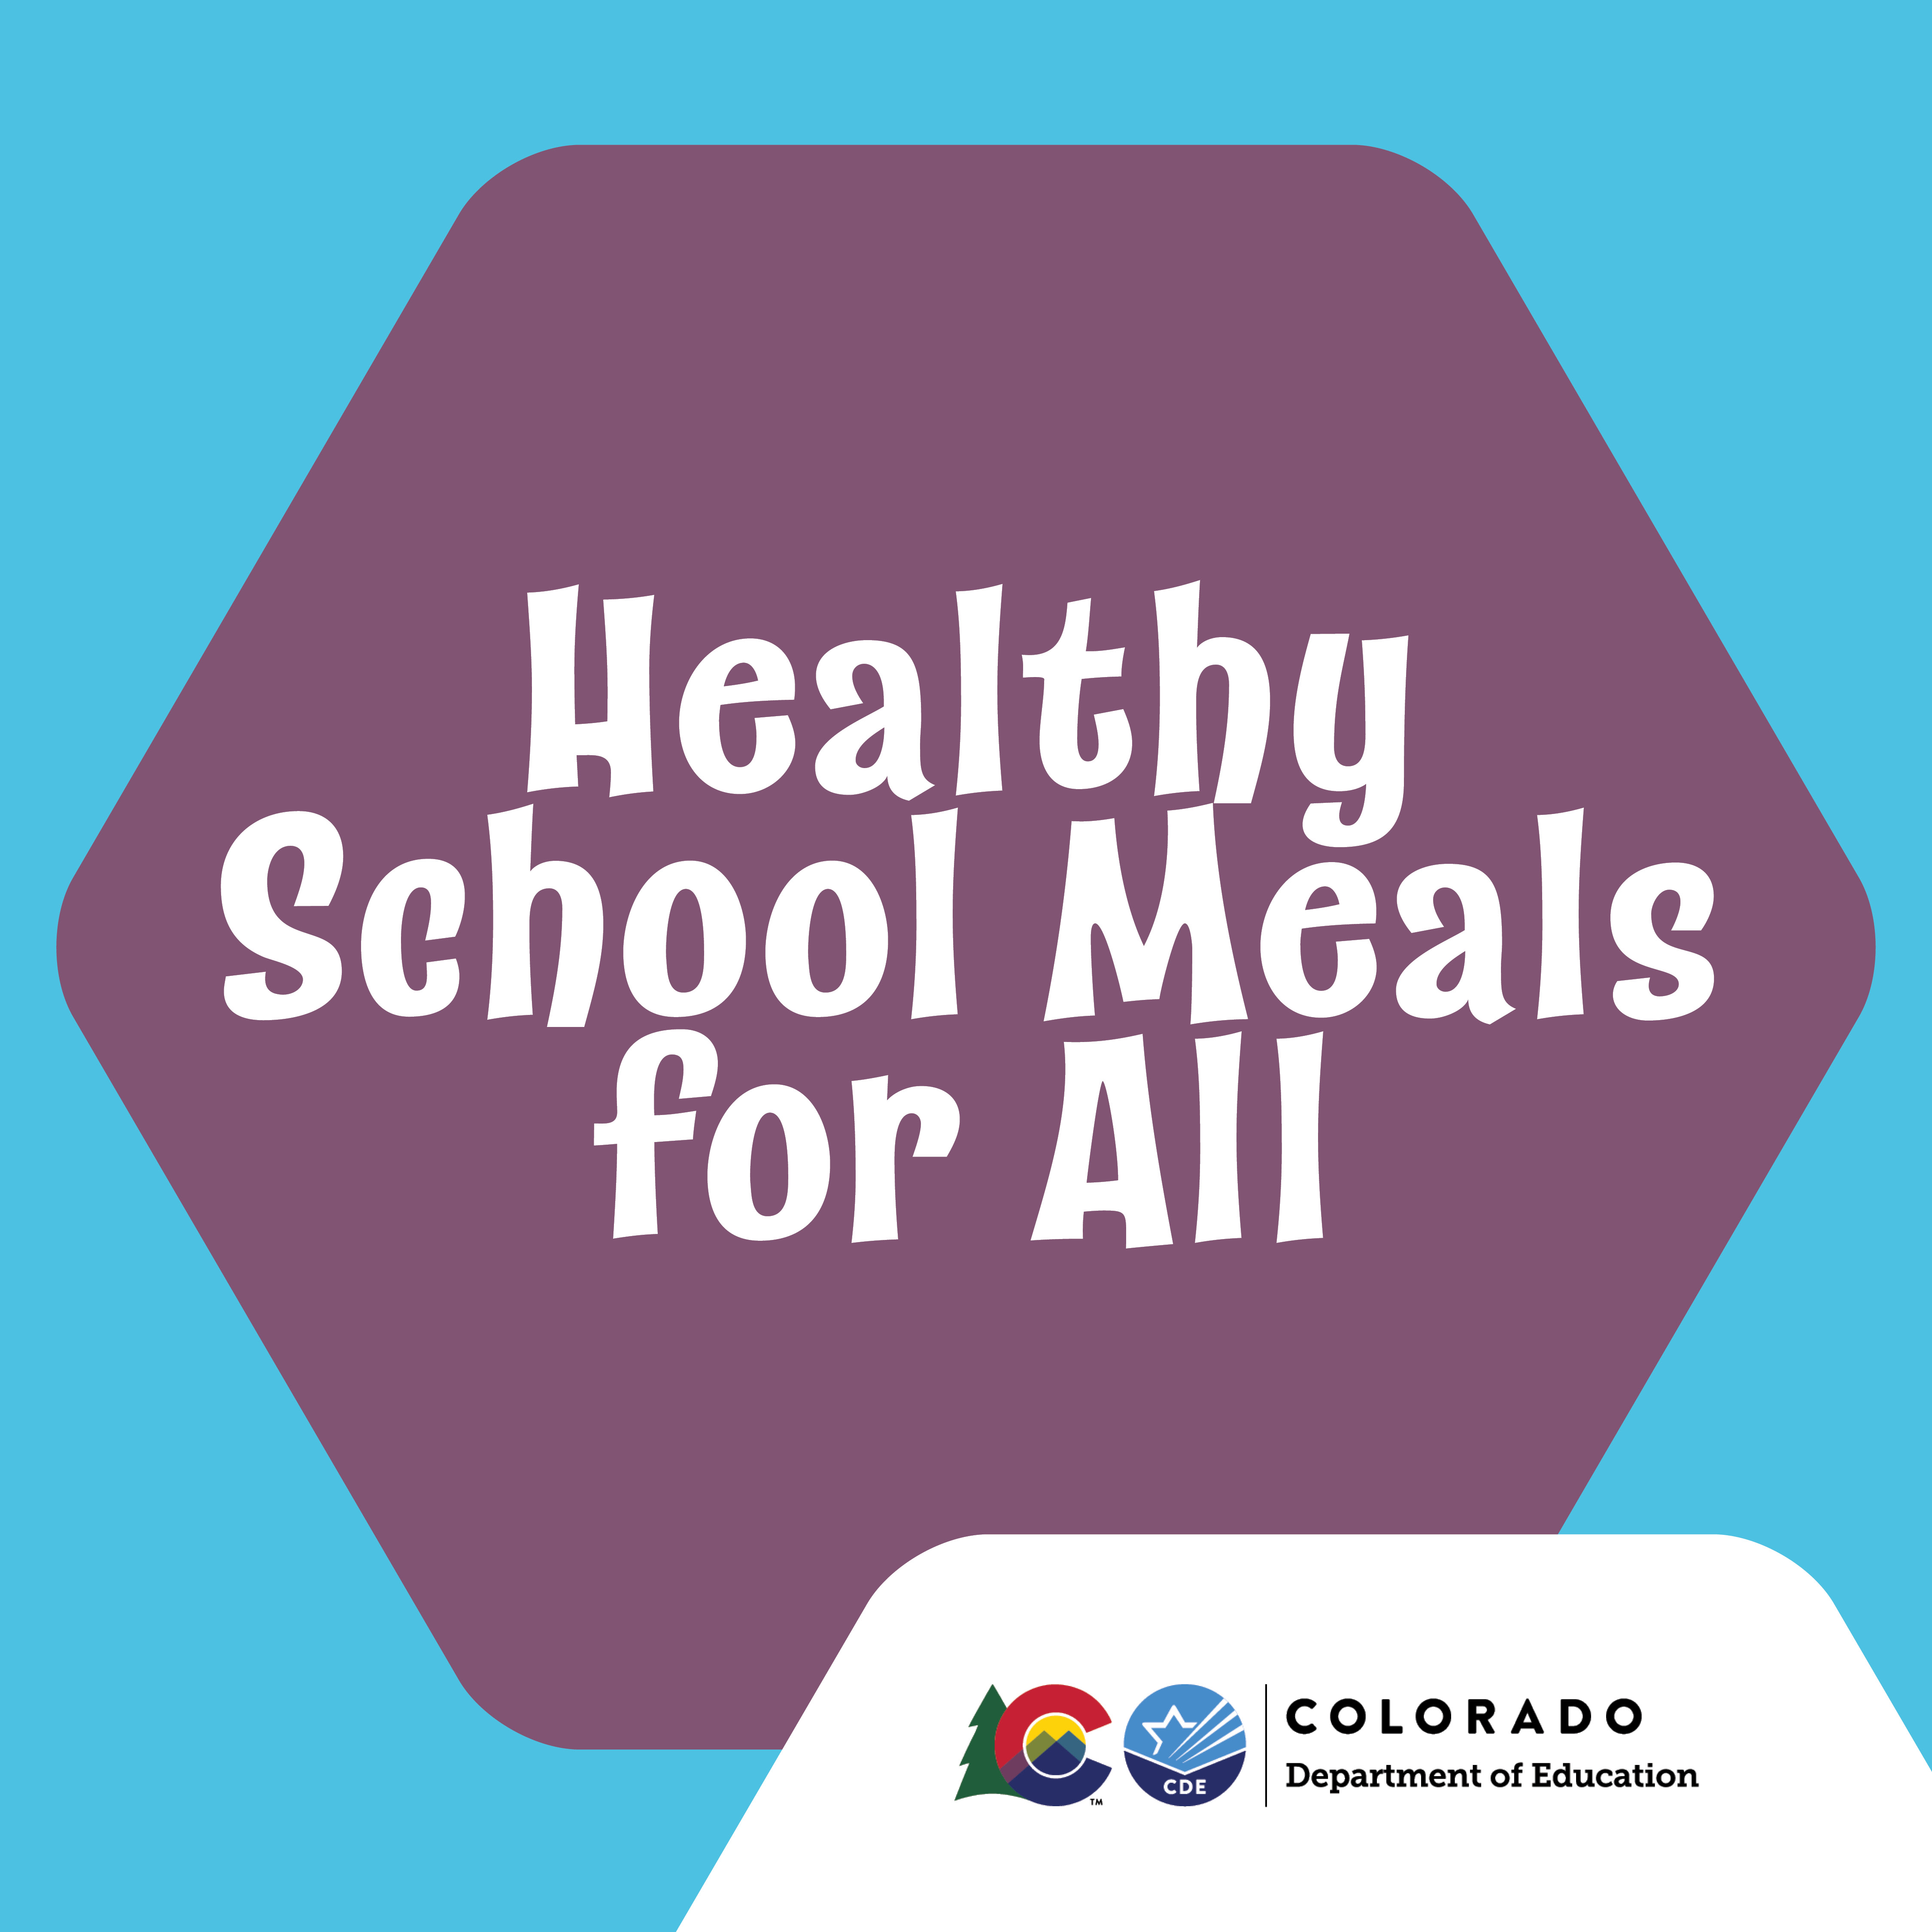  Healthy School Meals Colorado Department of Education social media image with text only